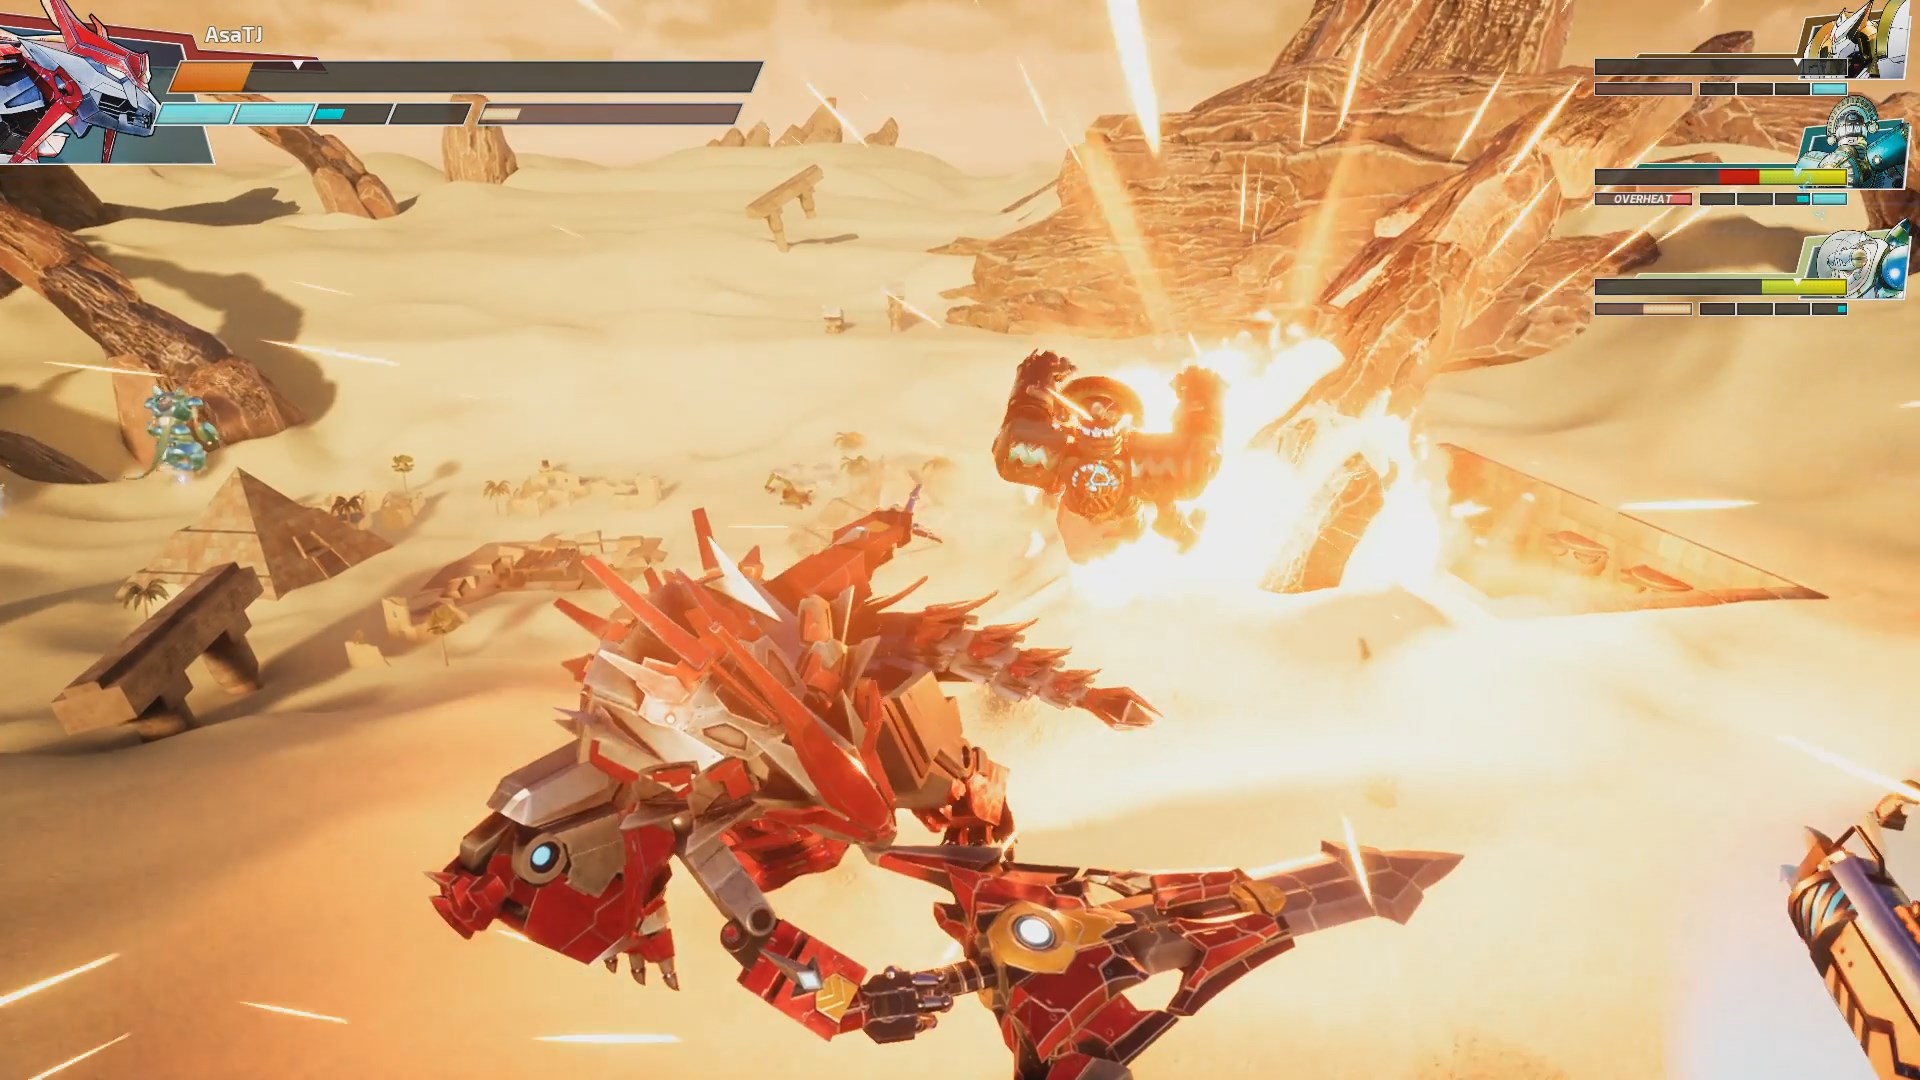 This upcoming mech fighting game features PvE and PvP